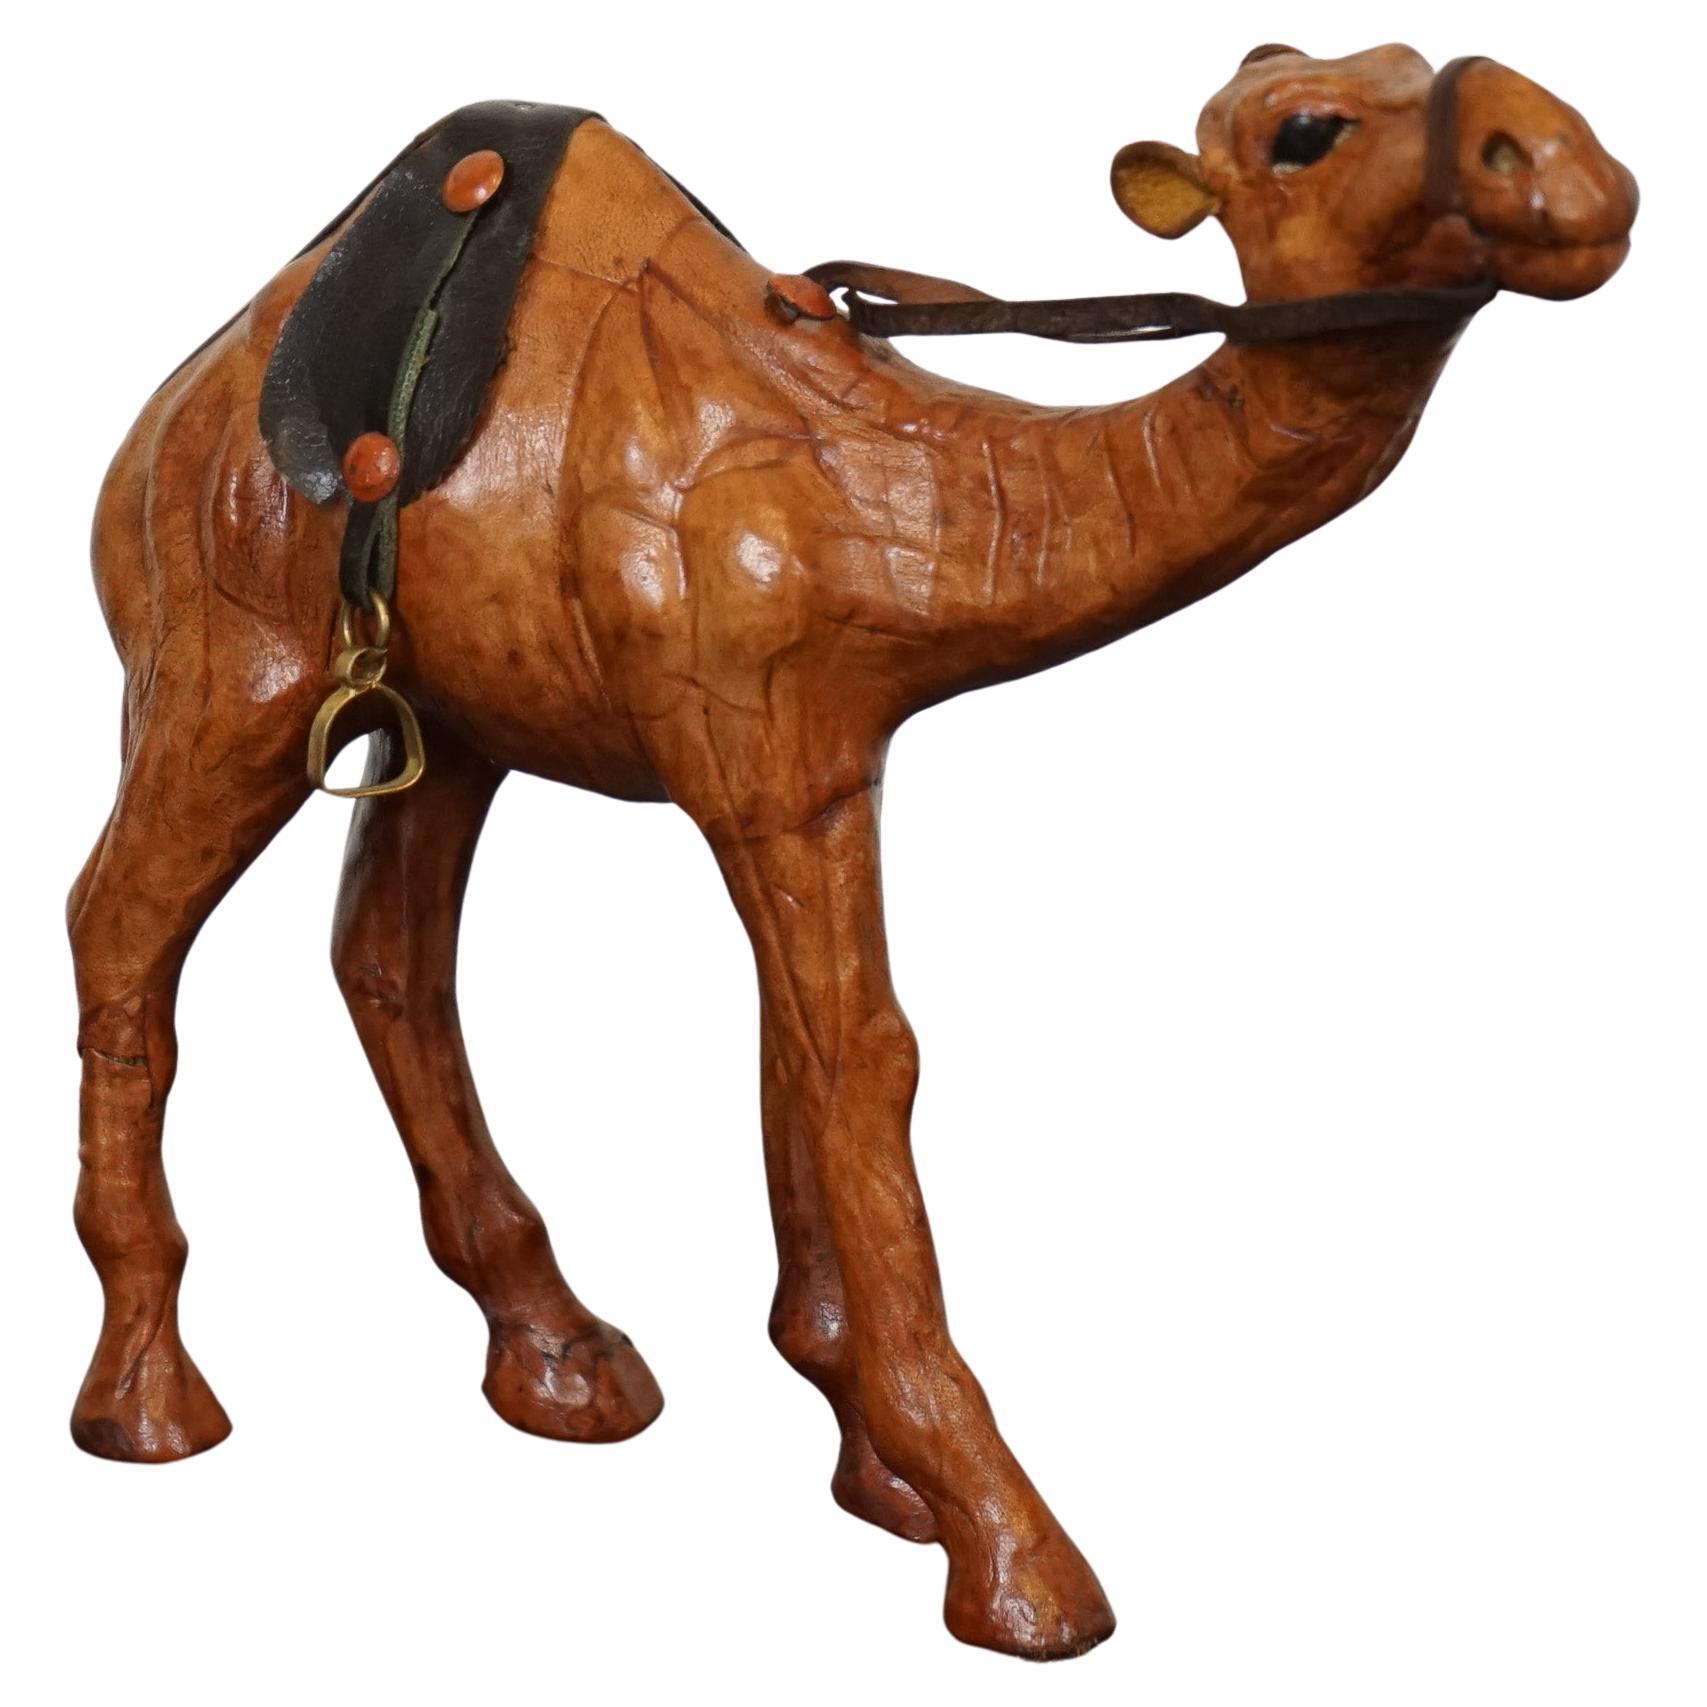 LIBERTY'S LONDON CAMEL SCULPTURE WiTH LOVELY AGED LEATHER ON HAND CARVED WOOD  For Sale